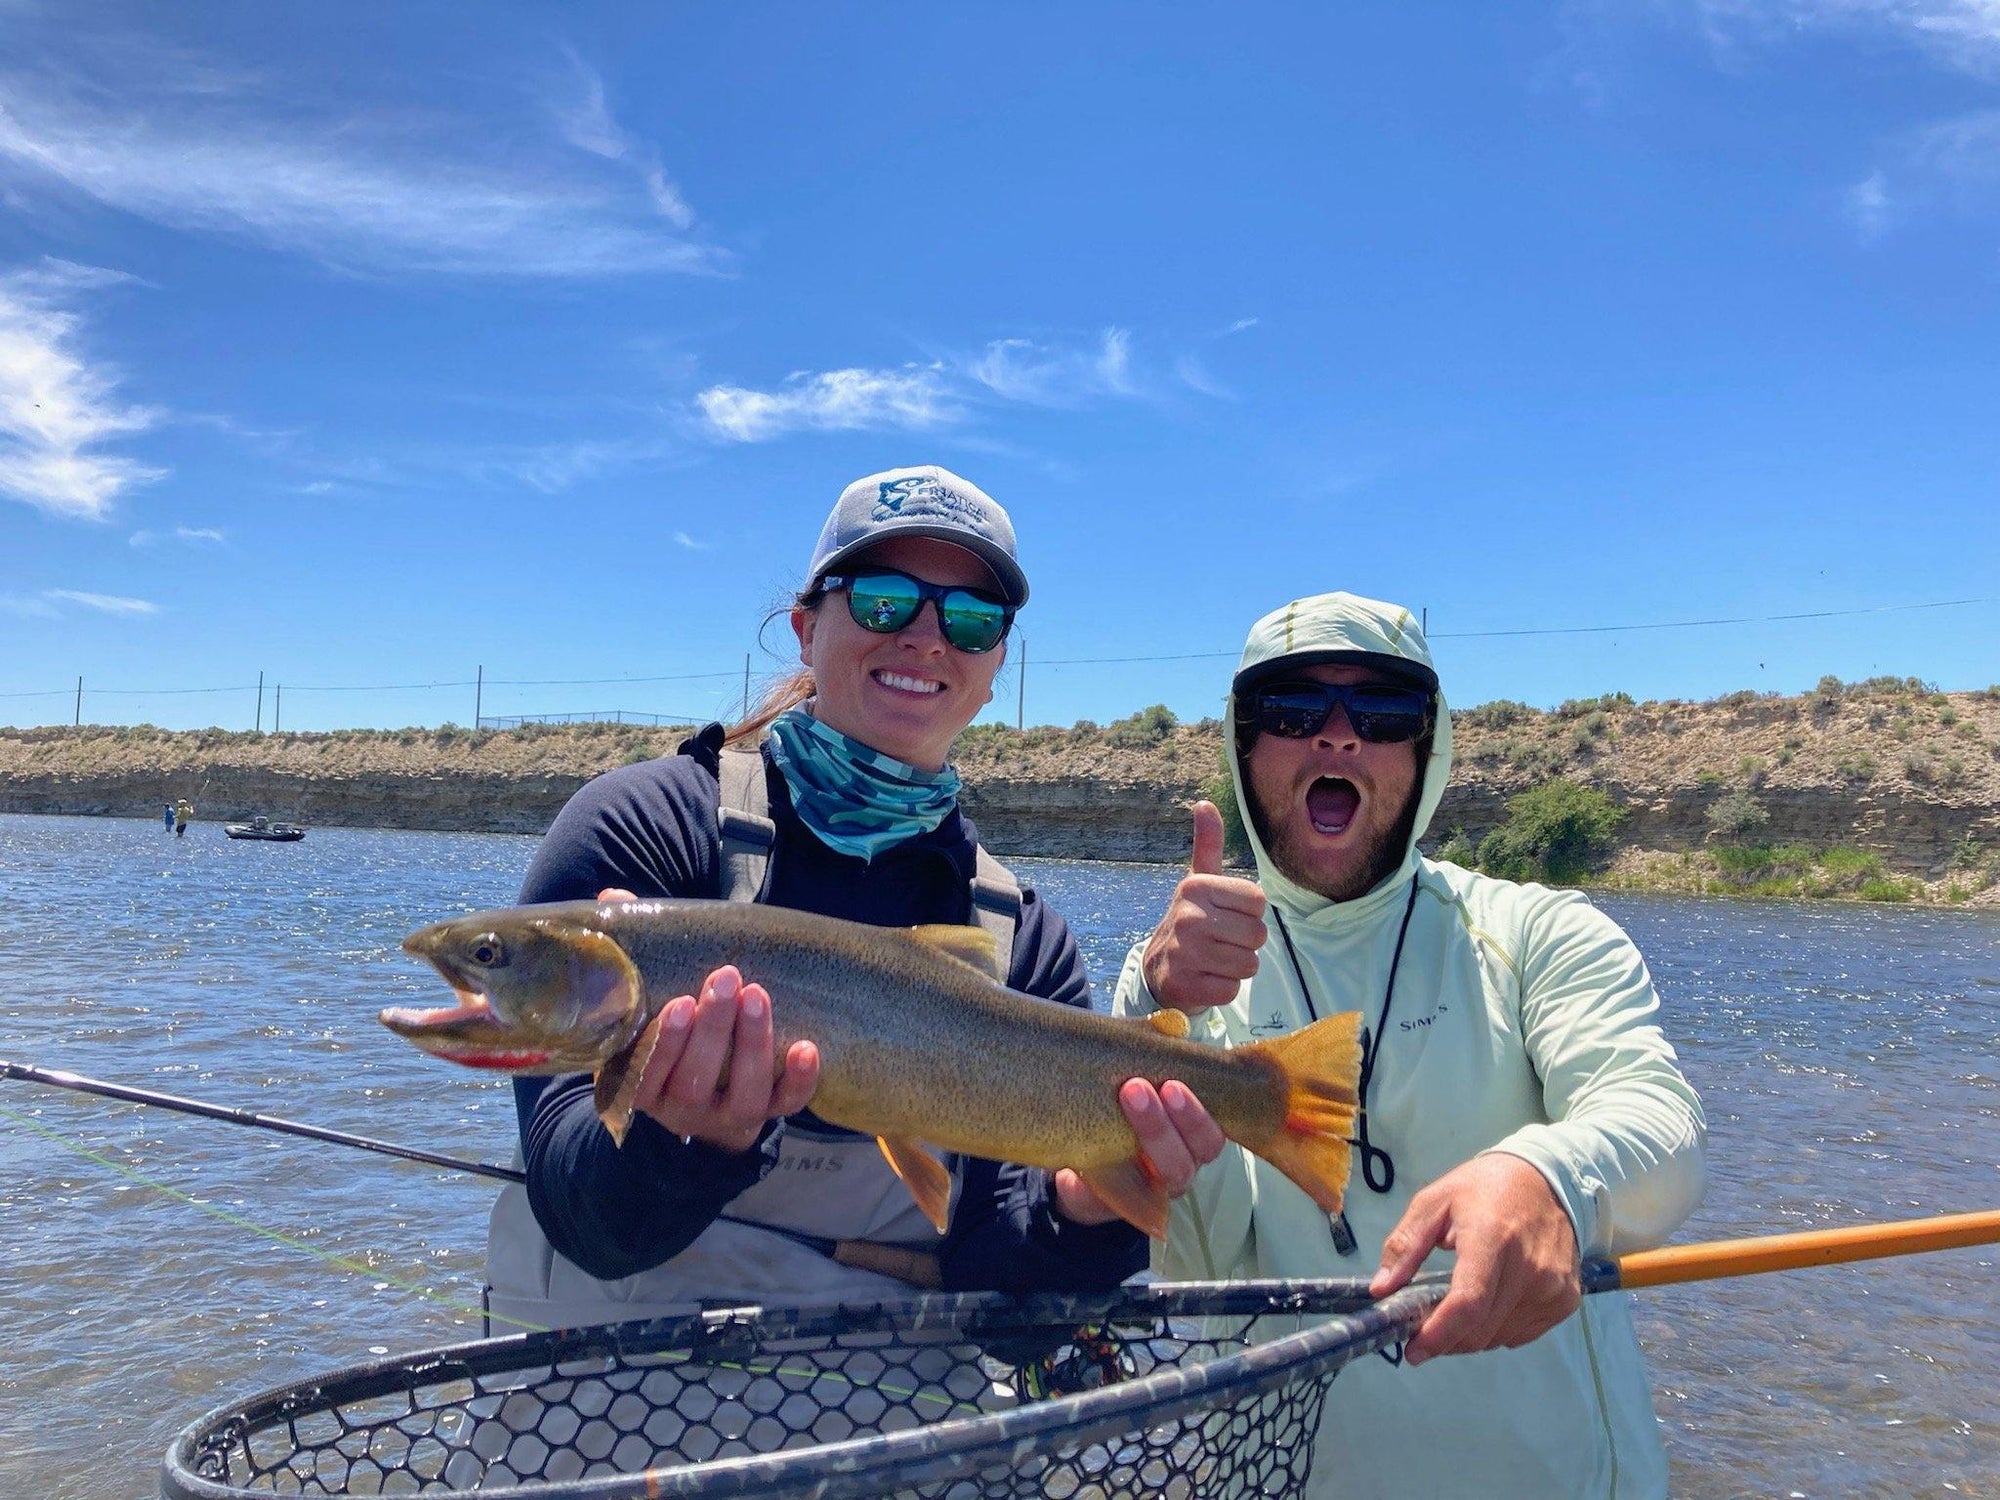 Finatical Flyfishing Women's Only Trip - The Green River - Pinedale, WY